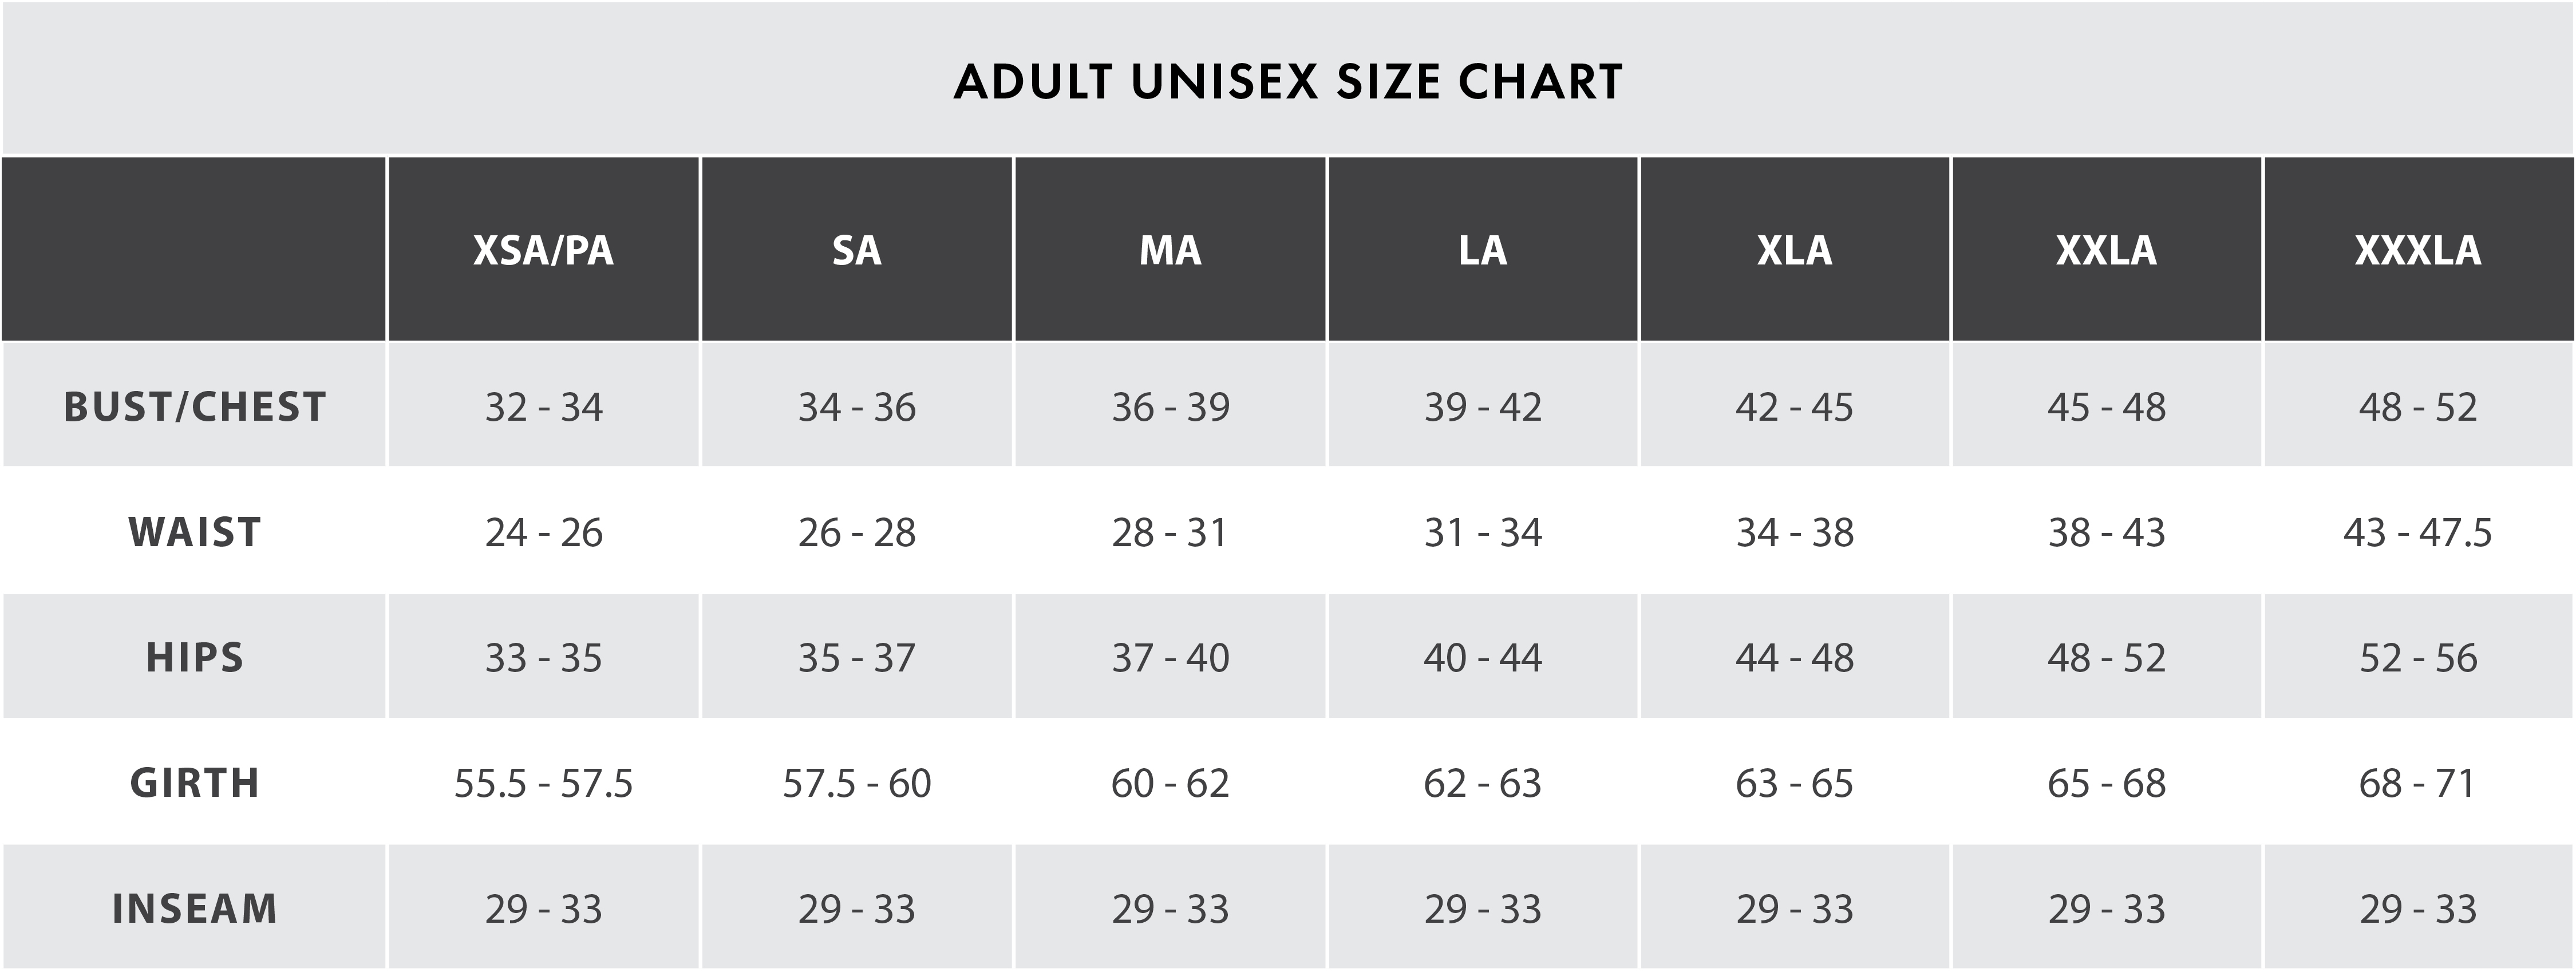 adult unisex size chart inches